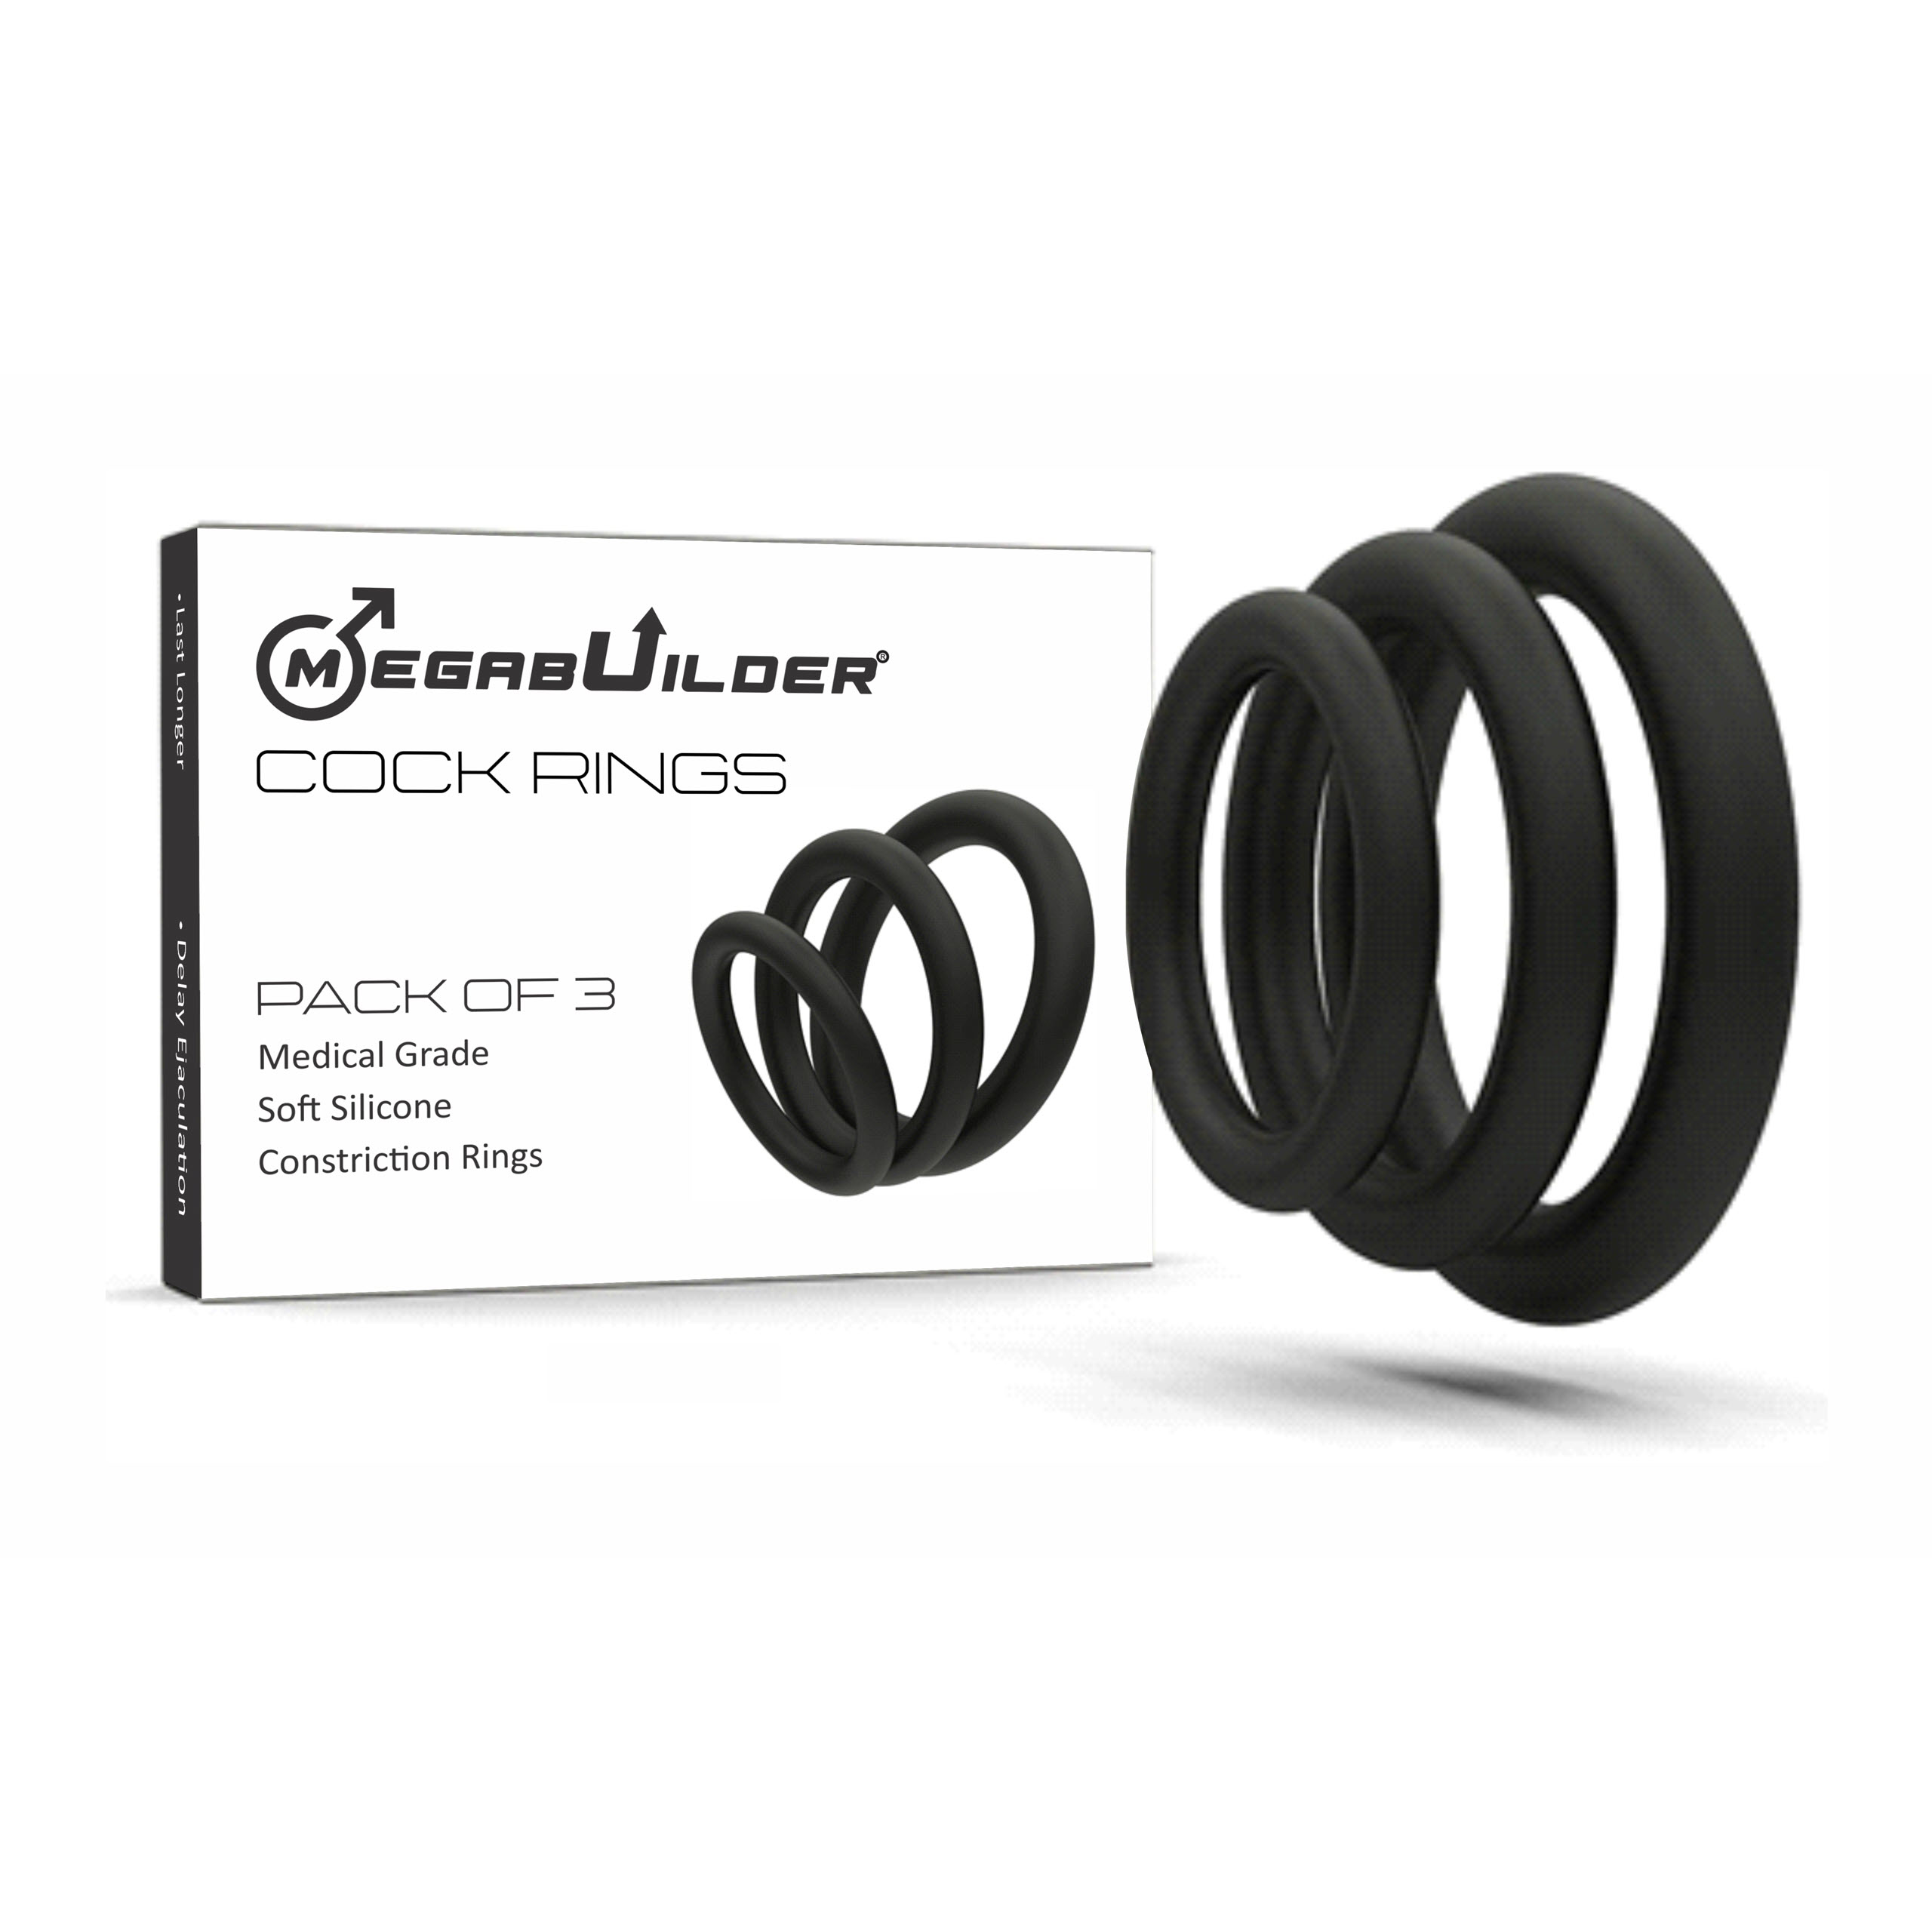 Owen Mumford APAC - The medical-grade silicone constriction rings are ideal  for men who need help to maintain an erection. The centre ring is designed  to encircle the base of the penis.